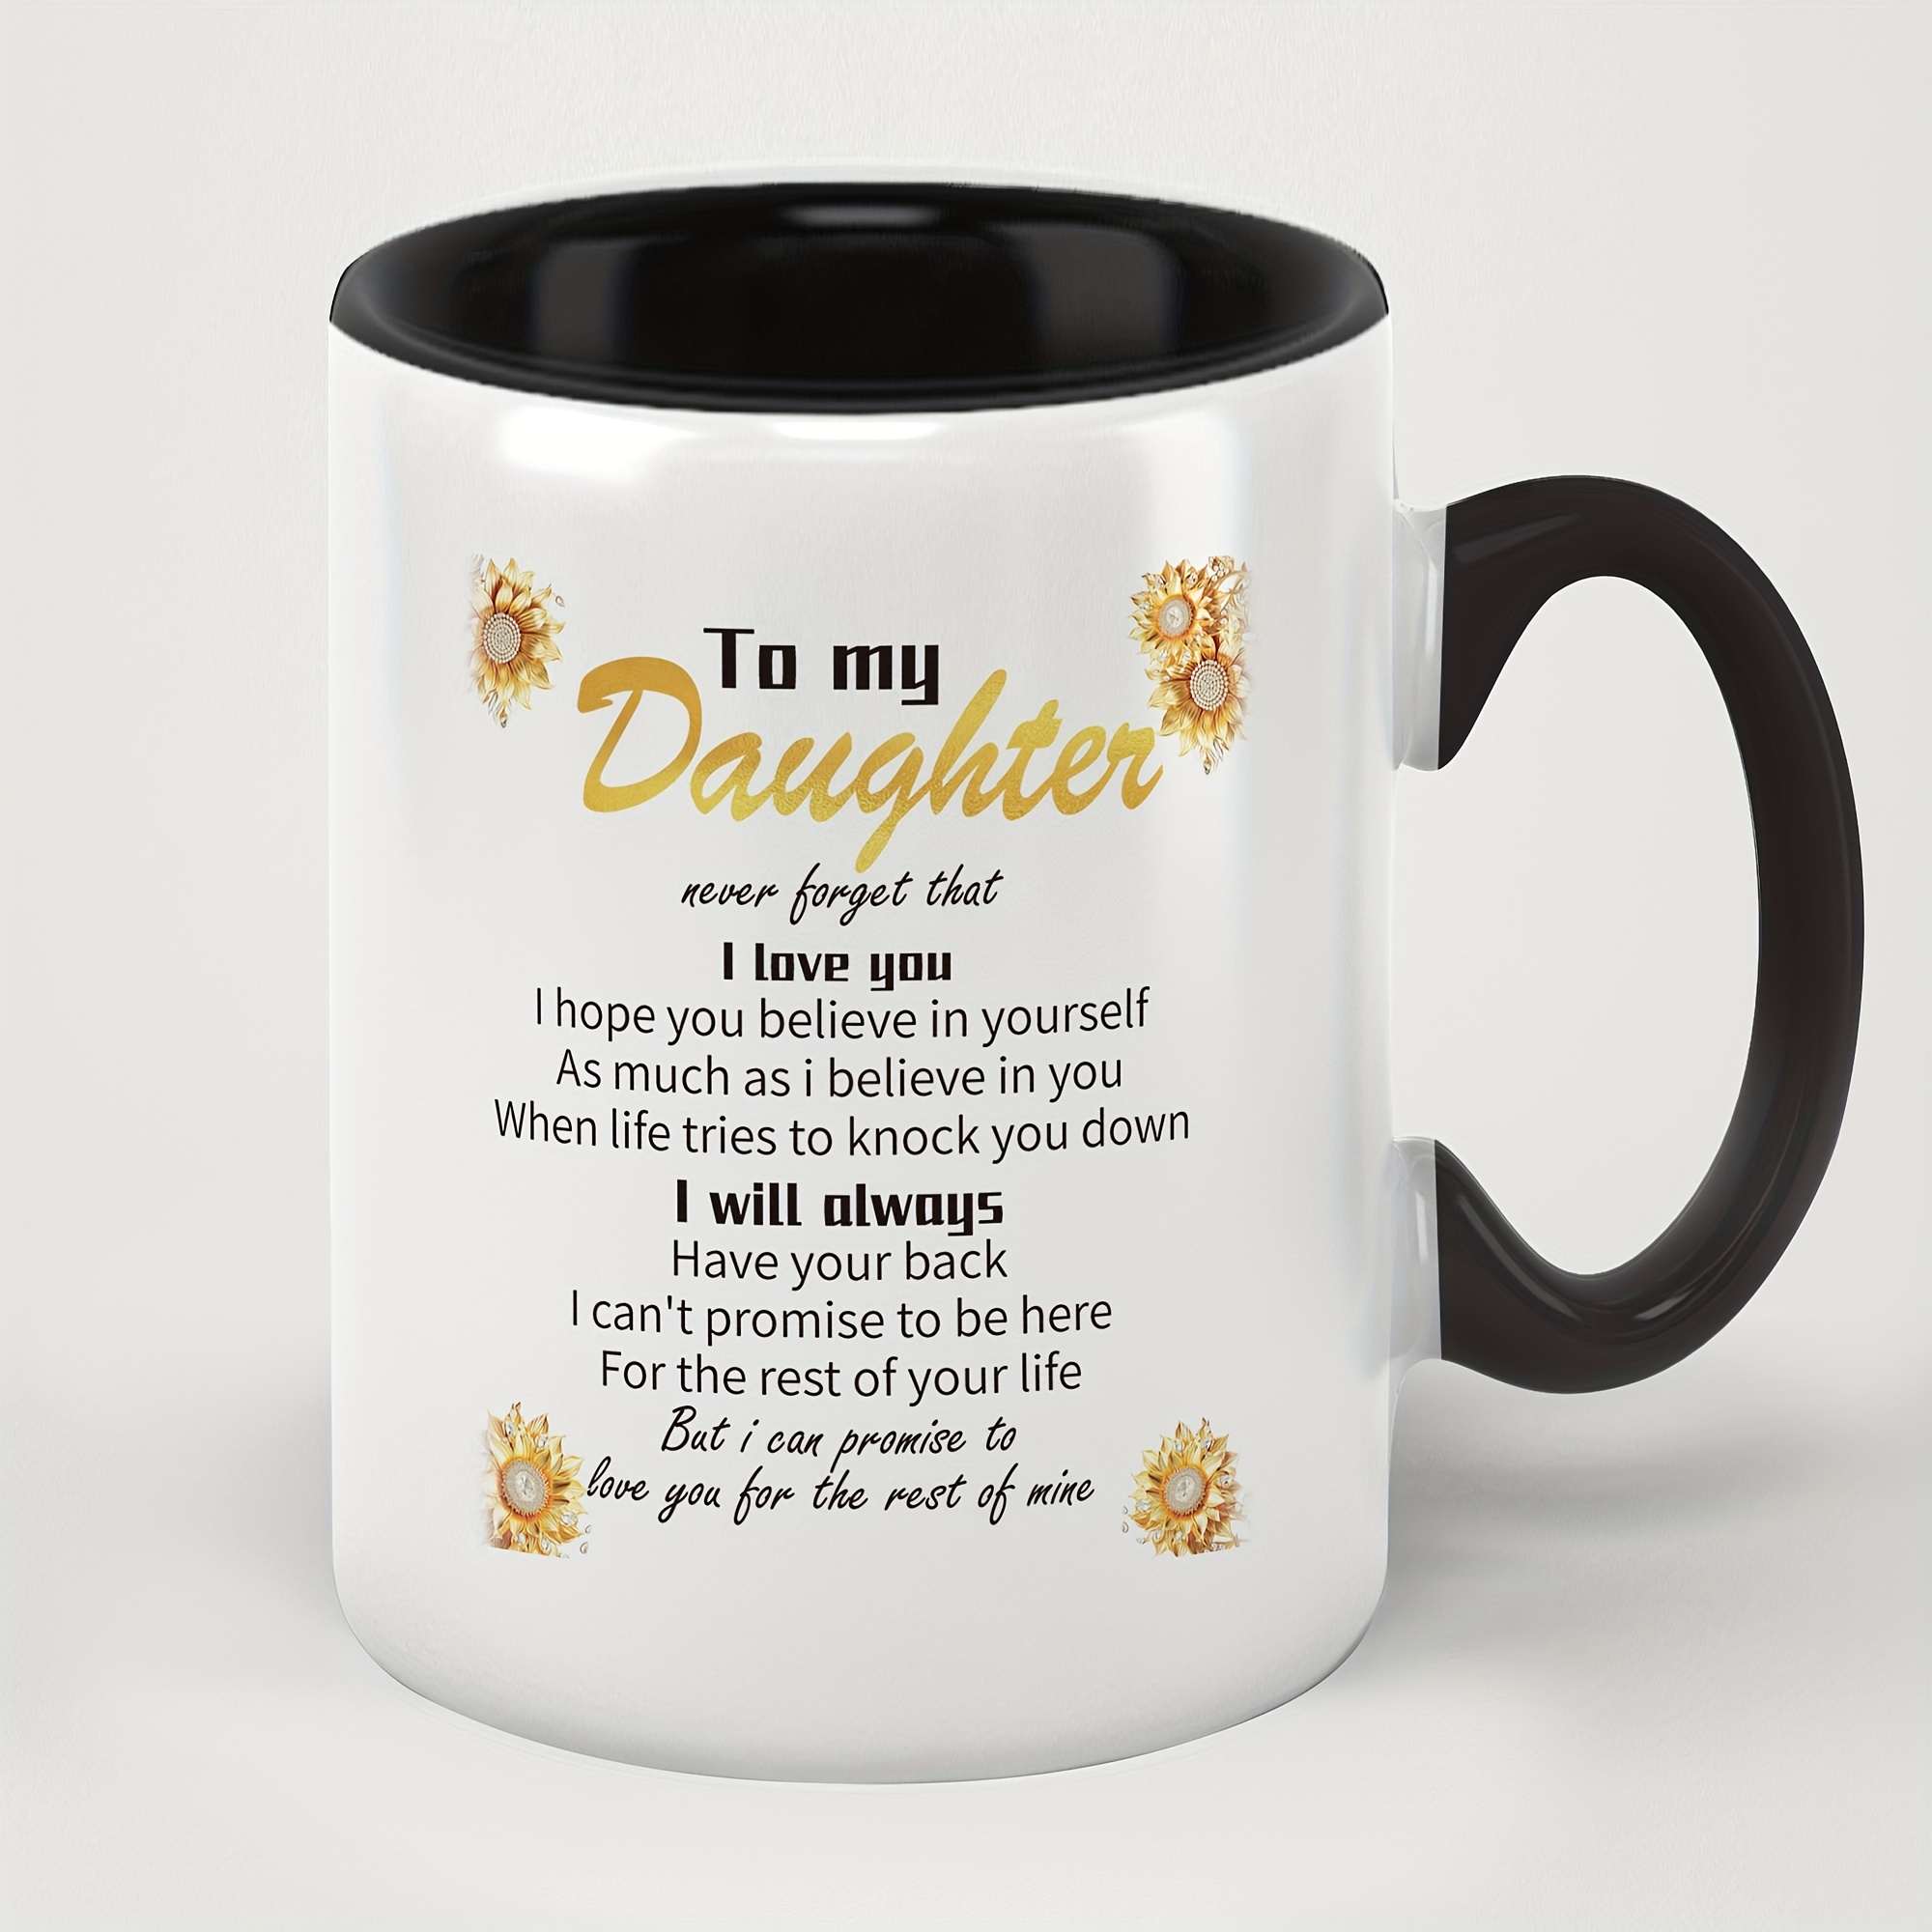 

1pc, Mug For Daughter. Restaurant Ceramic Mug, Water Cup, Coffee Mug, Is The Perfect Friend Gift, Anniversary Celebration Gift, Gift For Daughter, Motto Mug